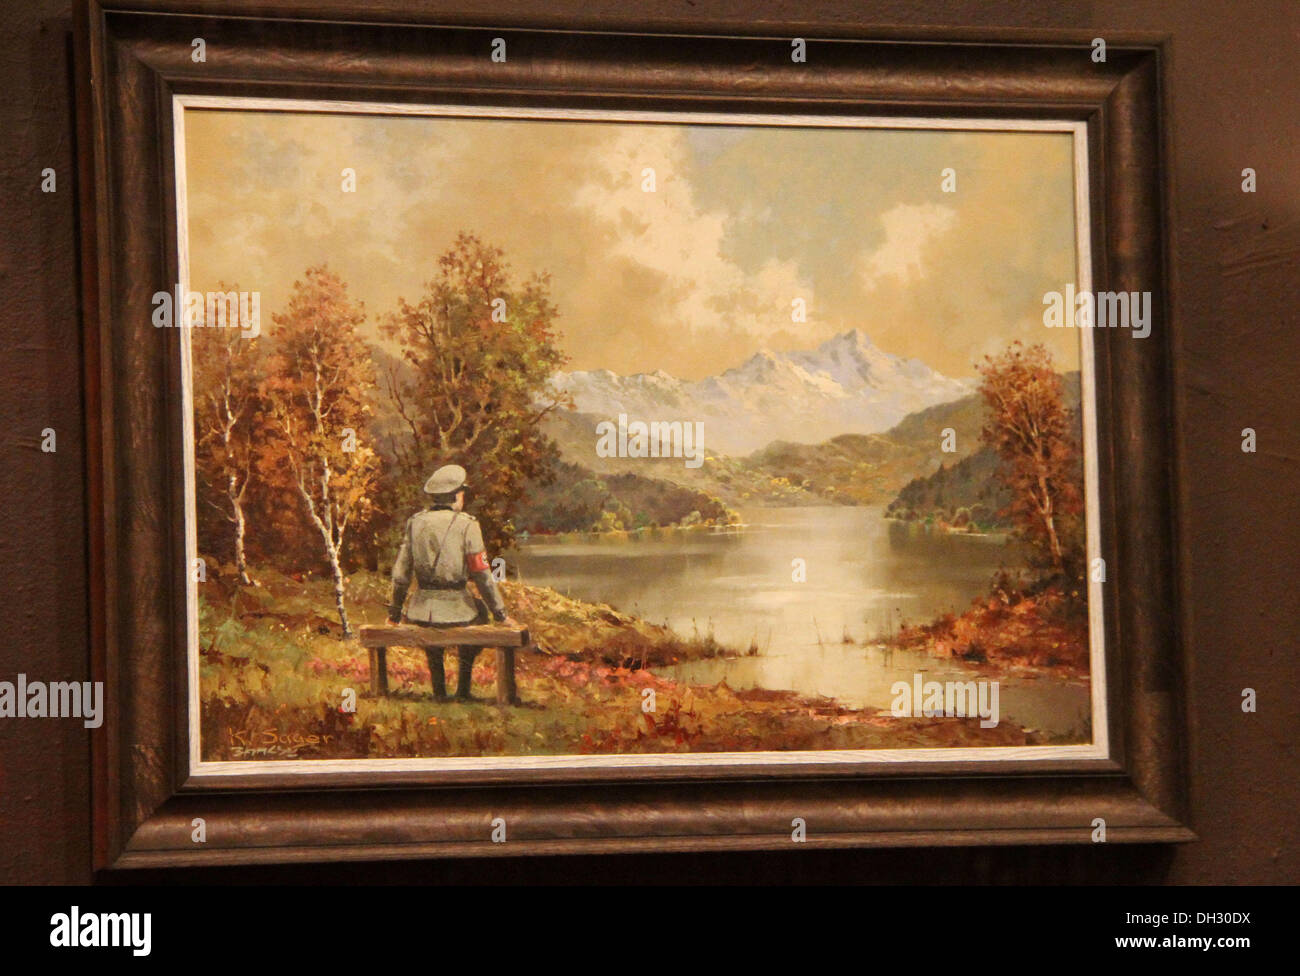 New York, New York, USA. 29th Oct, 2013. A view of the 'vandalized' Nazi soldier painting entitled 'The banality of the banality of evil' by British artist Banksy's, located at the Housing Works Gramercy thrift shop. The painting was a thrift store painting by K.Sager which Banksy is believed to have purchased and added or 'vandalized' the Nazi soldier sitting on a bench. Banksy also added his signature below the original artist. It was then returned to the thrift store where it will be auctioned to benefit HIV/AIDS and homelessness needs on Friday. © ZUMA Press, Inc./Alamy Live News Stock Photo